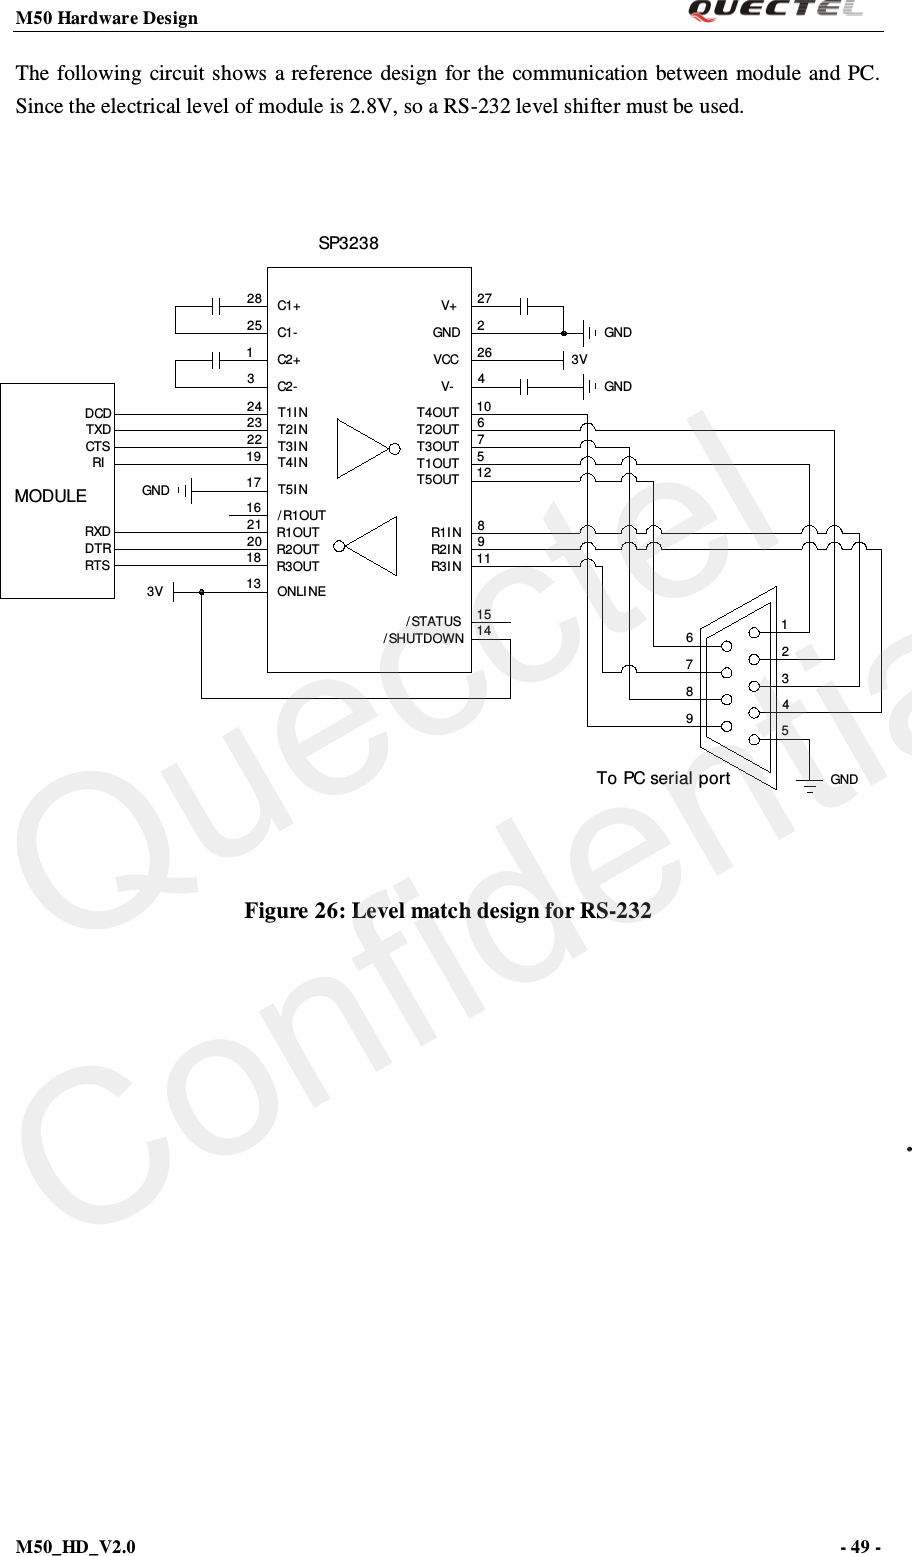 M50 Hardware Design                                                                M50_HD_V2.0                                                                      - 49 -   The following circuit shows a reference design for the communication between module and PC. Since the electrical level of module is 2.8V, so a RS-232 level shifter must be used.  98765432115148911125761042622713182021161719222324312528GNDSP32383VGNDGNDT5OUT/ SHUTDOWNV+GNDV-VCCT4OUTT2OUTT3OUTT1OUTR3I NR2I NR1I N/ STATUS3V ONLINER1OUTR2OUTR3OUT/ R1OUTGND T5INT4I NT3I NT2I NT1I NC2+C2-C1-C1+MODULERXDDTRRTSRICTSTXDDCDTo PC serial port Figure 26: Level match design for RS-232   Quecctel Confidential